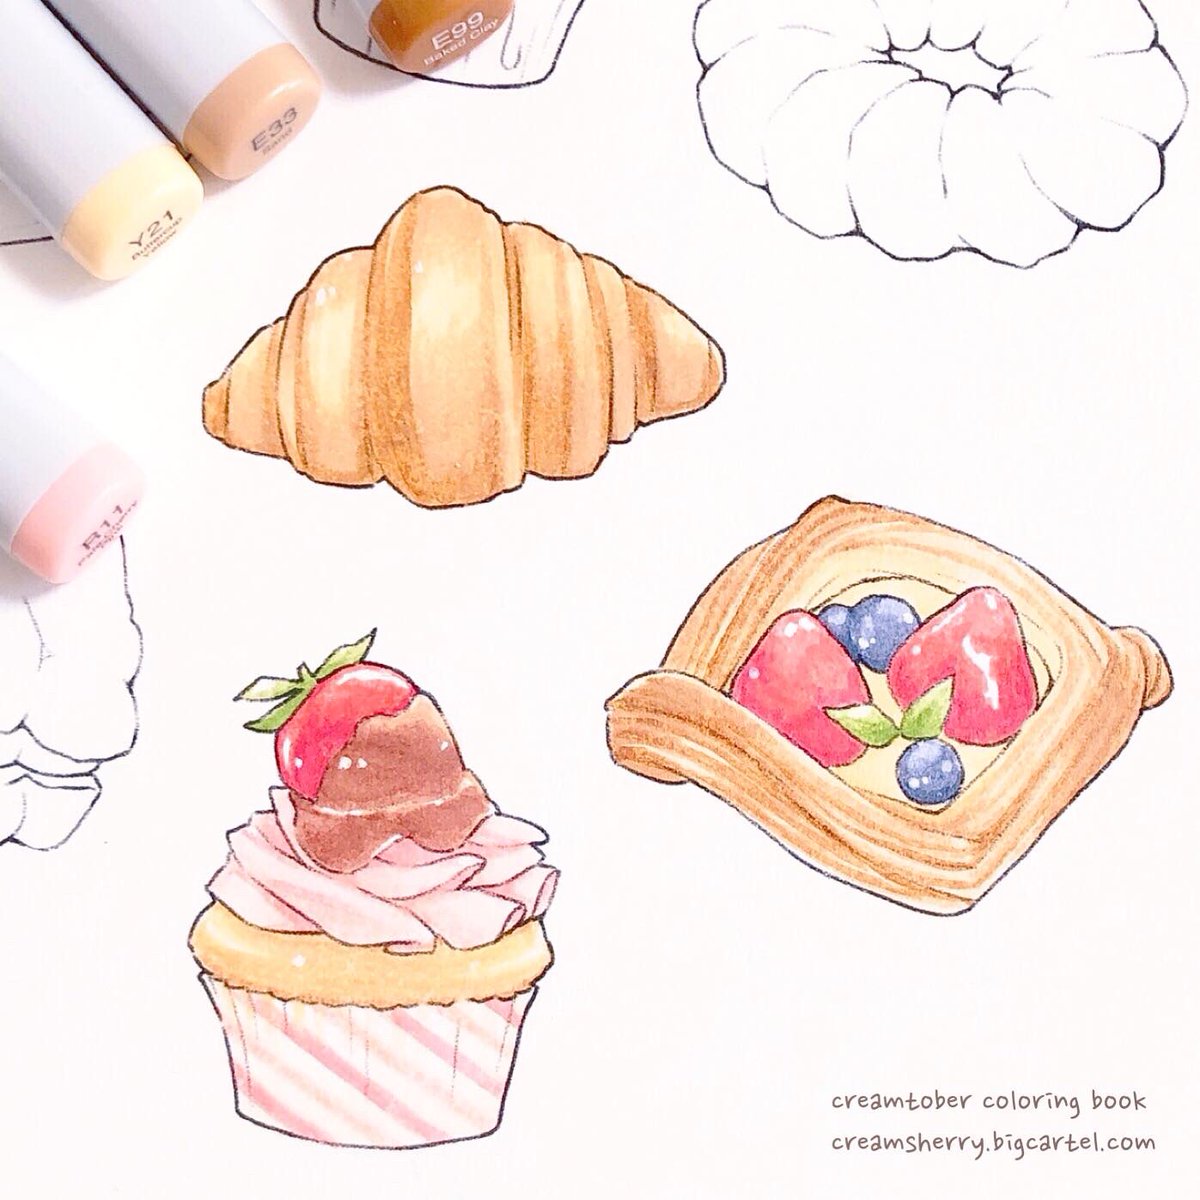 #creamtober2020 day 6: bread ?✨

This is page 6 of my first creamtober coloring book! Currently up for pre-order on my shop! (≧◡≦) ?✨ https://t.co/NZaG8u3mgh 